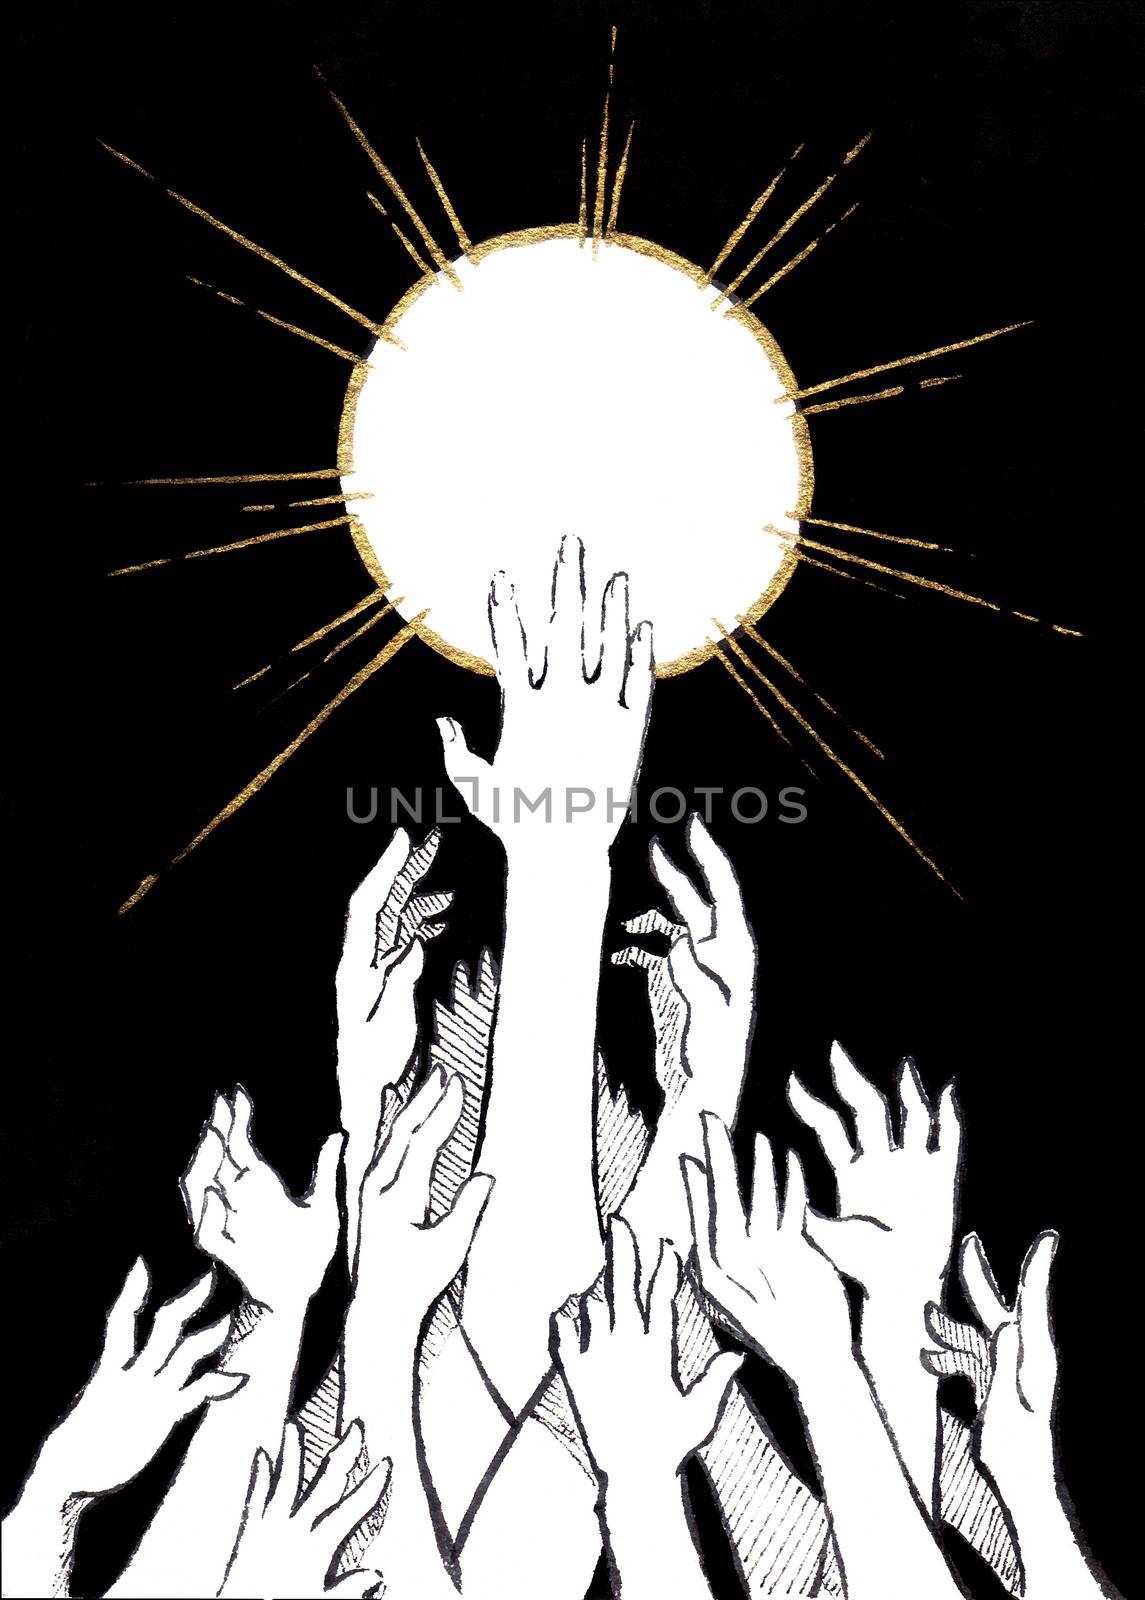 Many human hands try to reach for something in a golden circle. Concepts of hope, desire, passion and enchantment. Suitable for use in posters, flyers, book covers. by Ungamrung